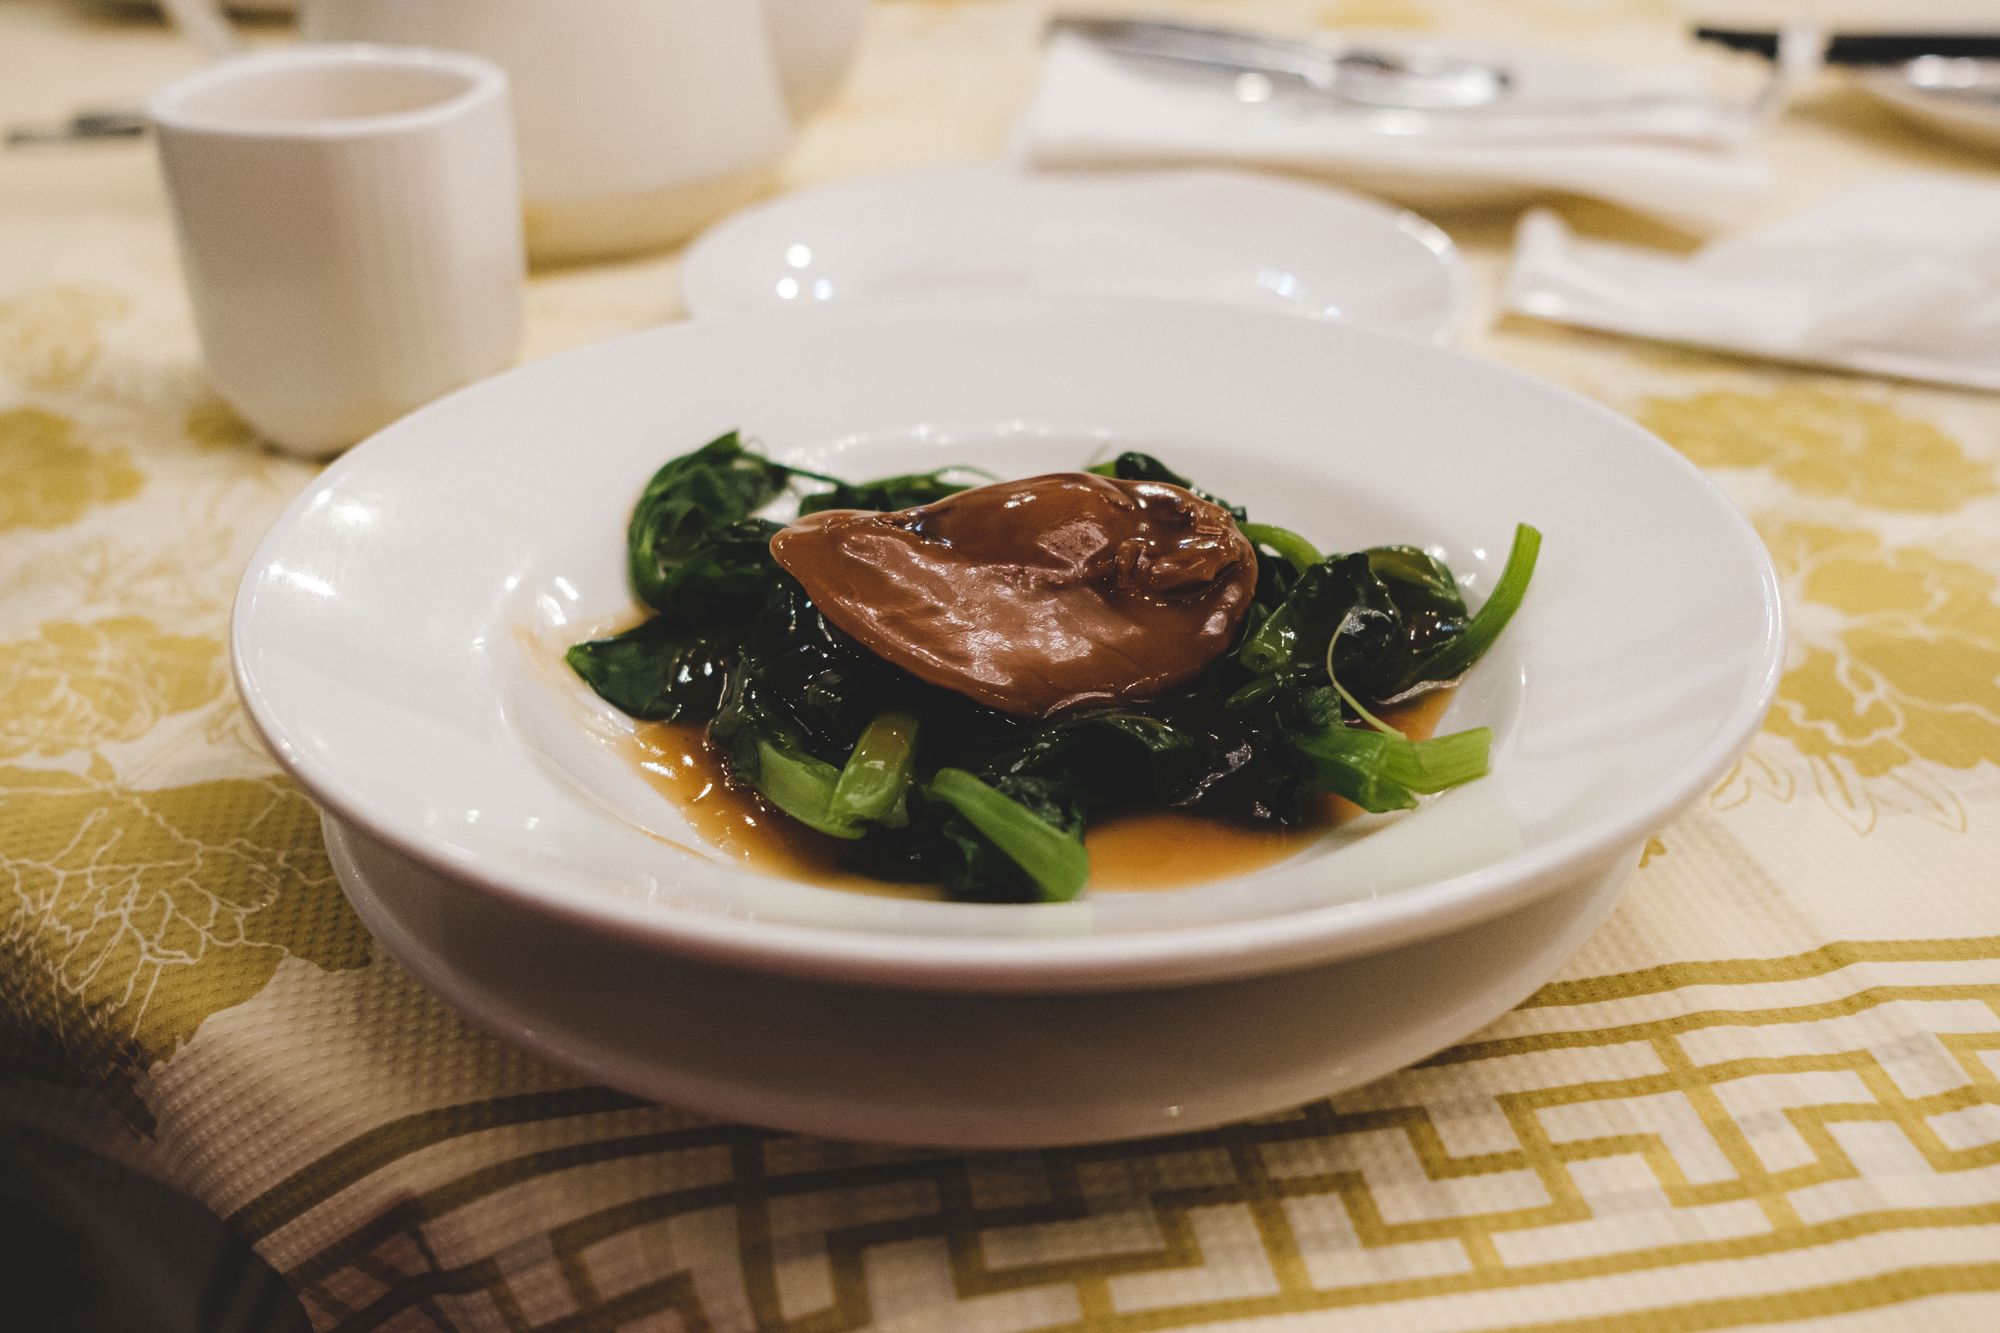 Golden Paramount Seafood Restaurant – Abalone with Pea Tips